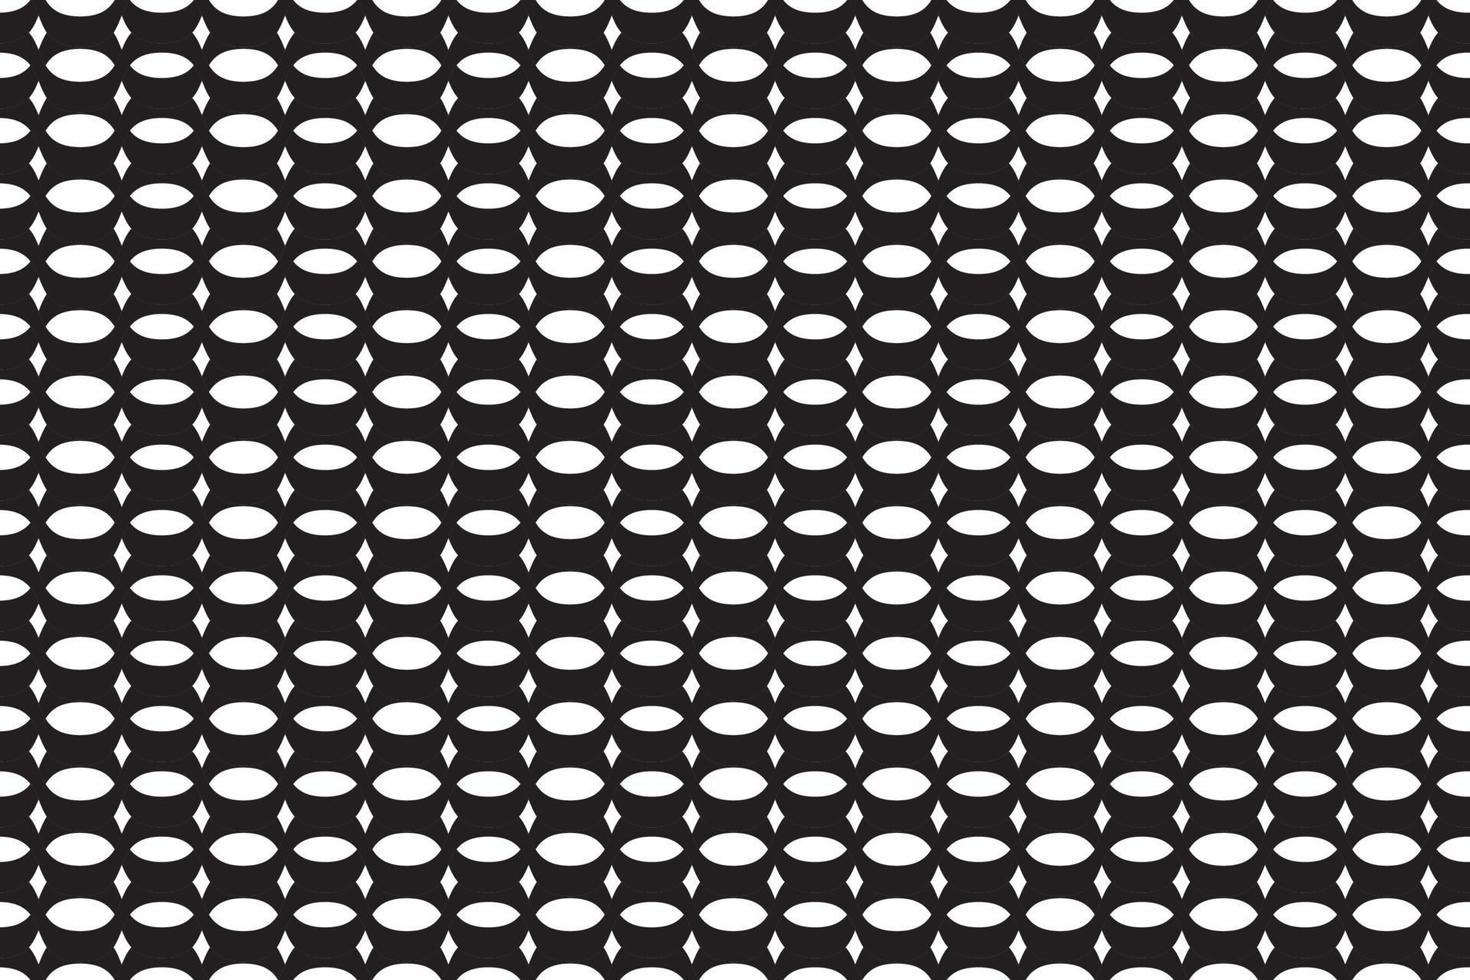 Seamless pattern with black and white colour background, geometric design pattern. Vector illustration.